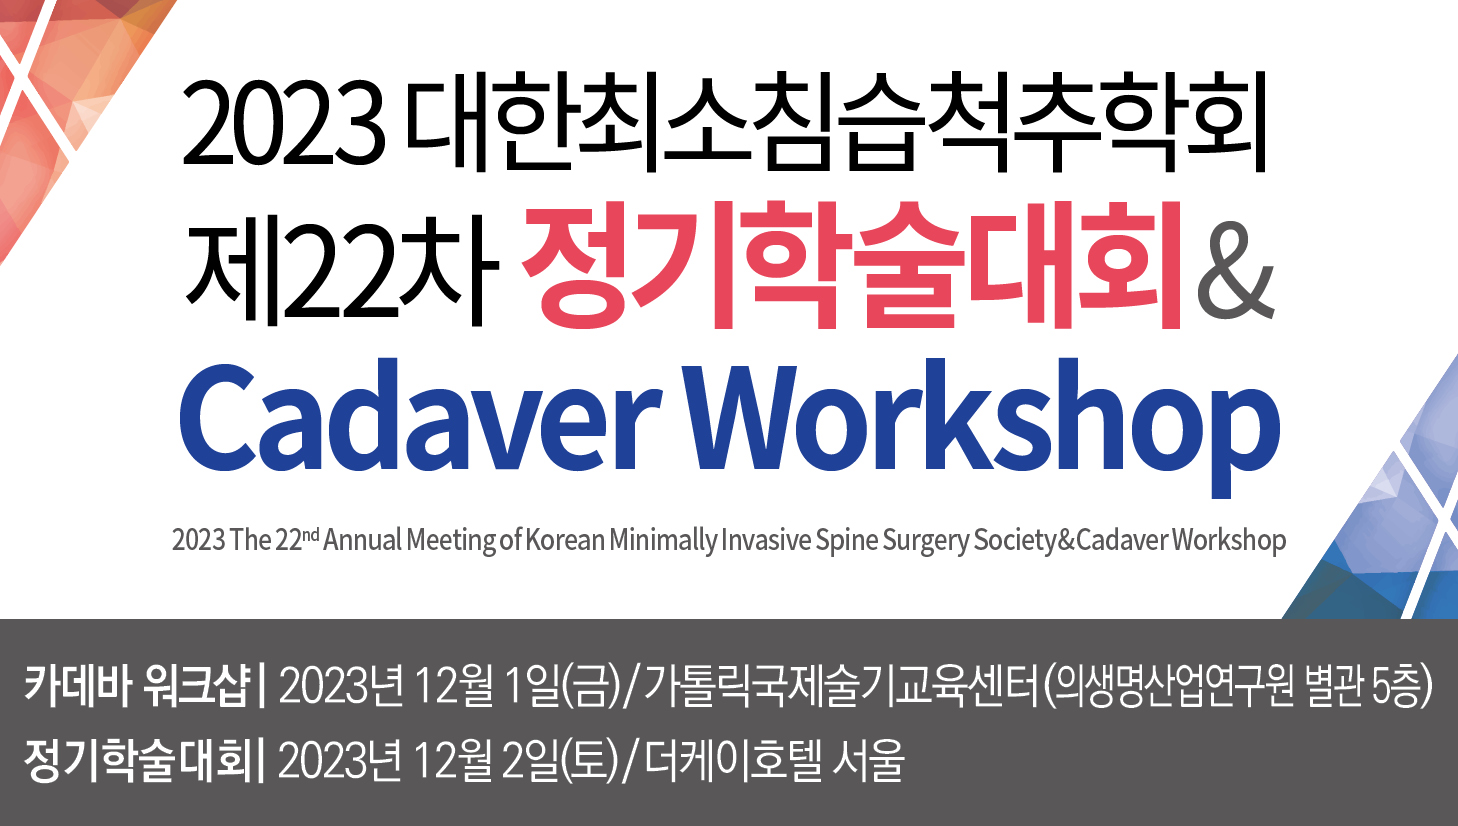 2023 the 22nd Annual Meeting of Korea Minimally Invasive Spine Surgery Society & Cadaver Workshop